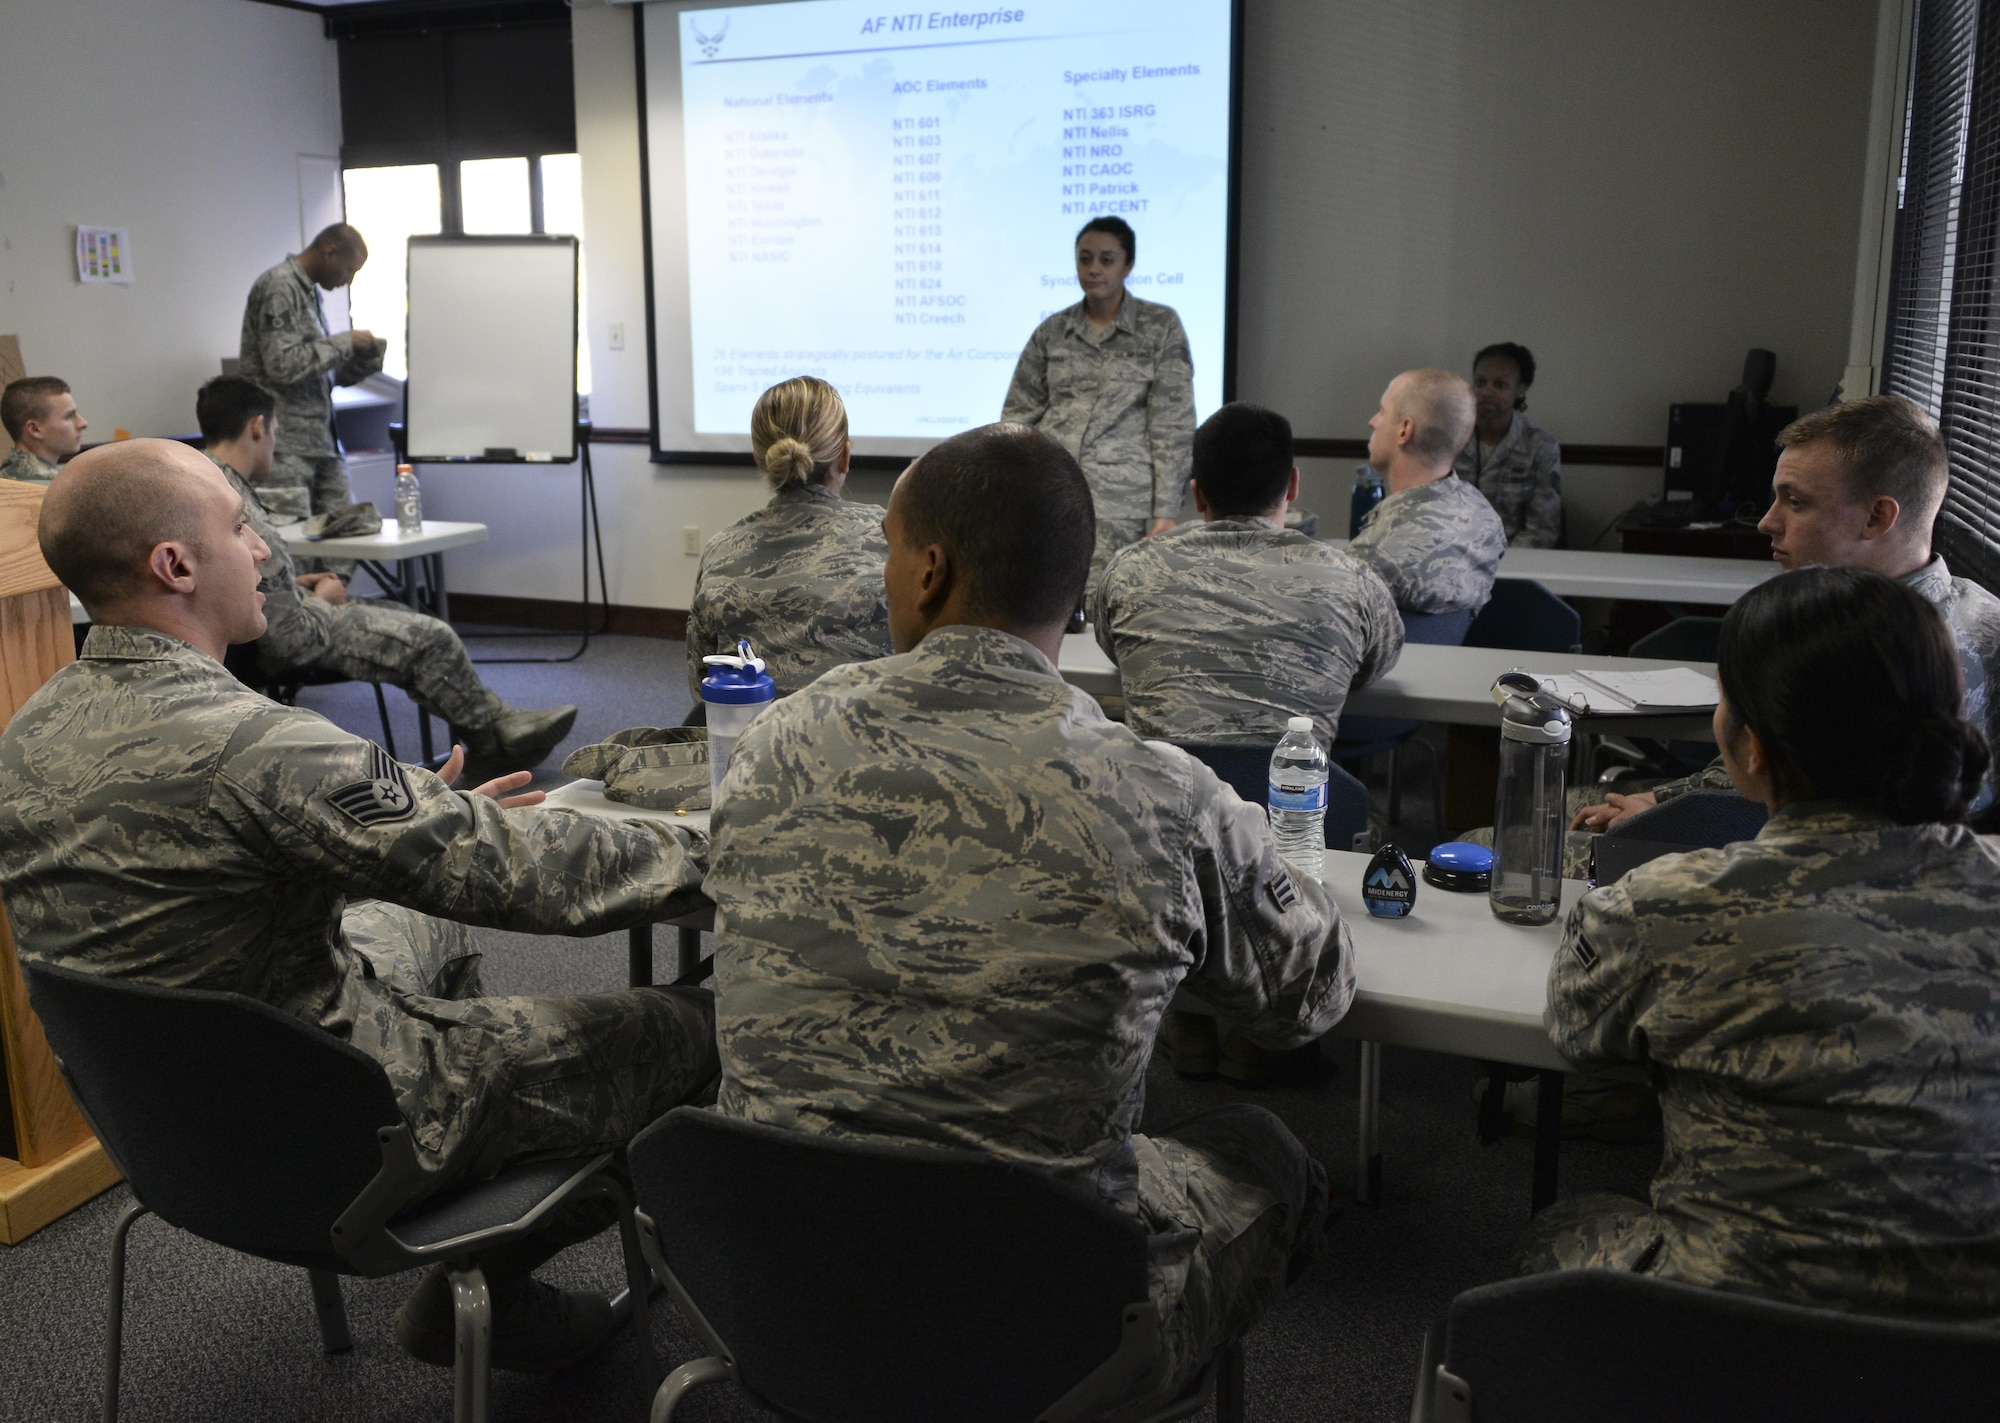 Airmen from the 70th Intelligence, Surveillance and Reconnaissance Wing discuss operational competencies during National Tactical Integration training November 4, 2016 at Fort Meade, Md. AF NTI works as an enterprise that collaborates to enhance Air Component operations around the world, as well as leveraging critical nation Intelligence Community information and capabilities. (U.S. Air Force photo/Staff Sgt. Alexandre Montes)